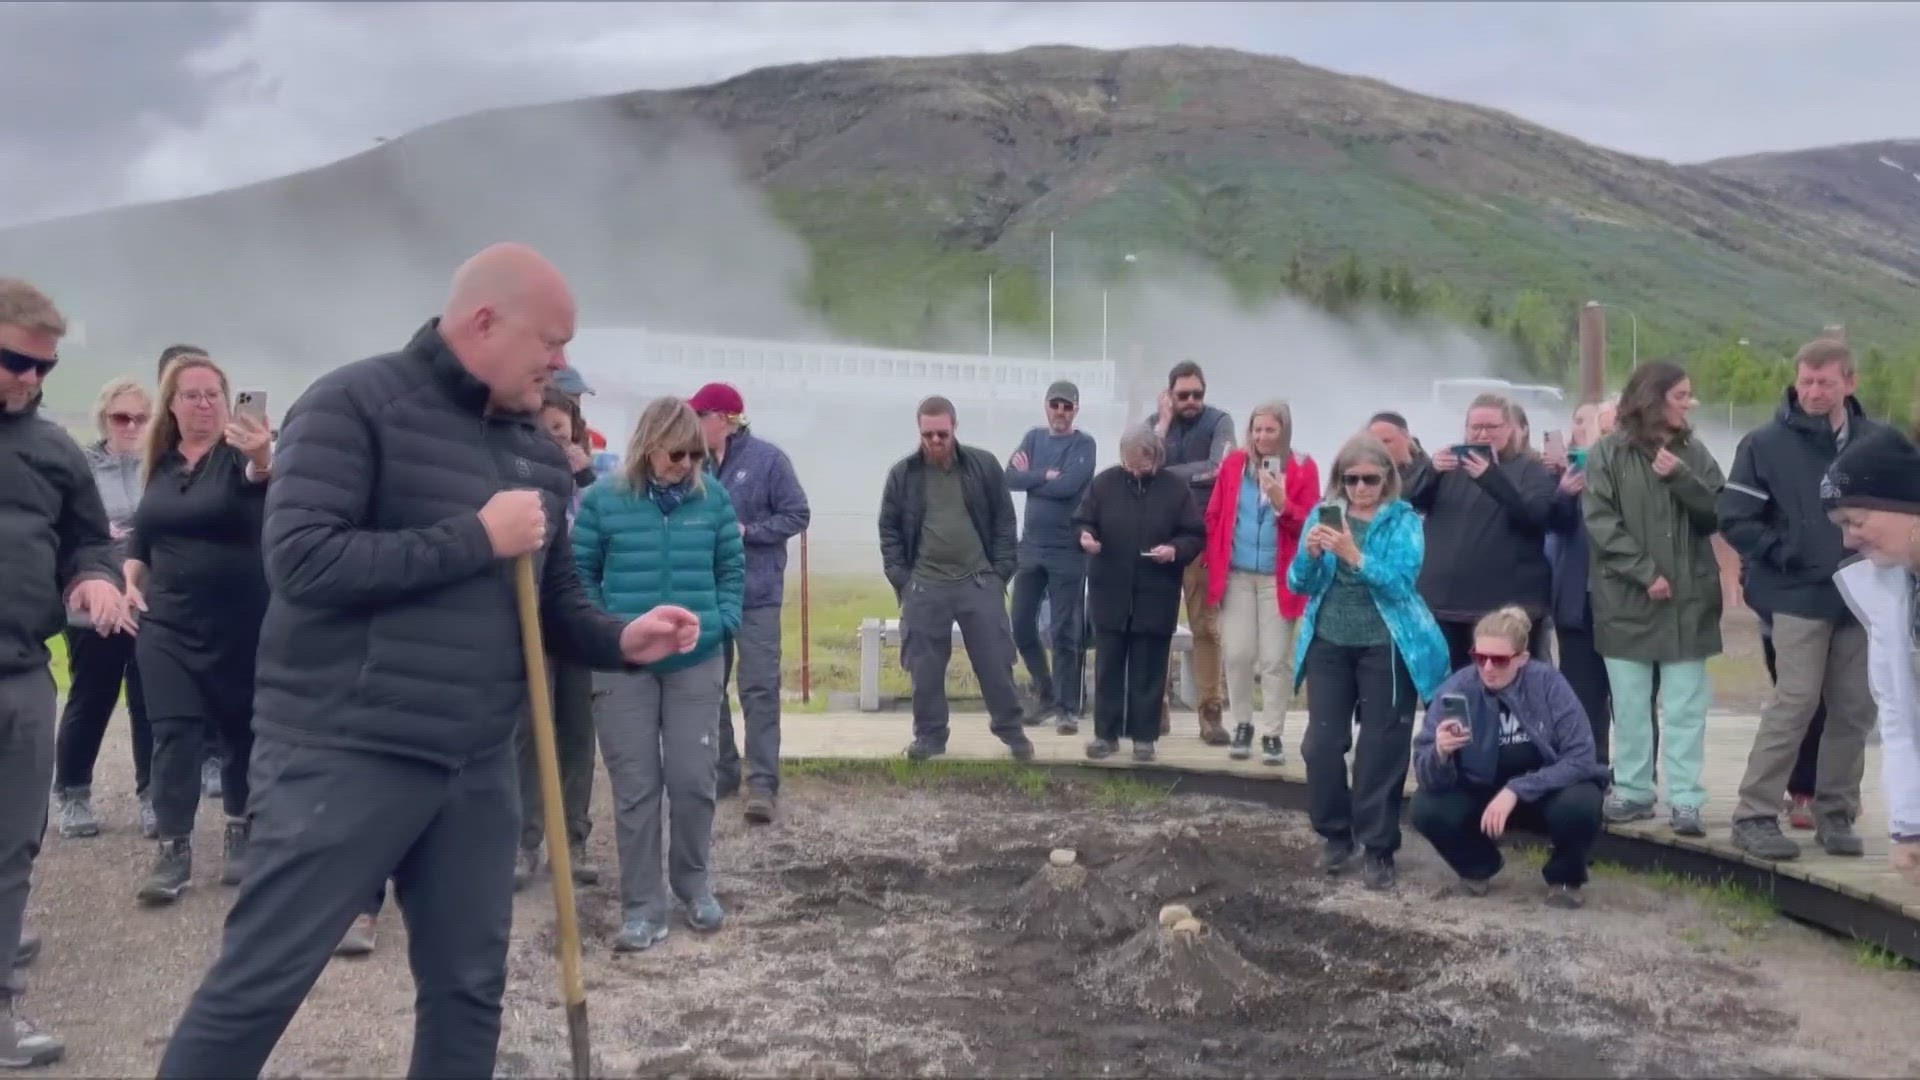 Steve Spangler on a trip with 50 teachers from across the U.S. on an adventure of a lifetime to Iceland.